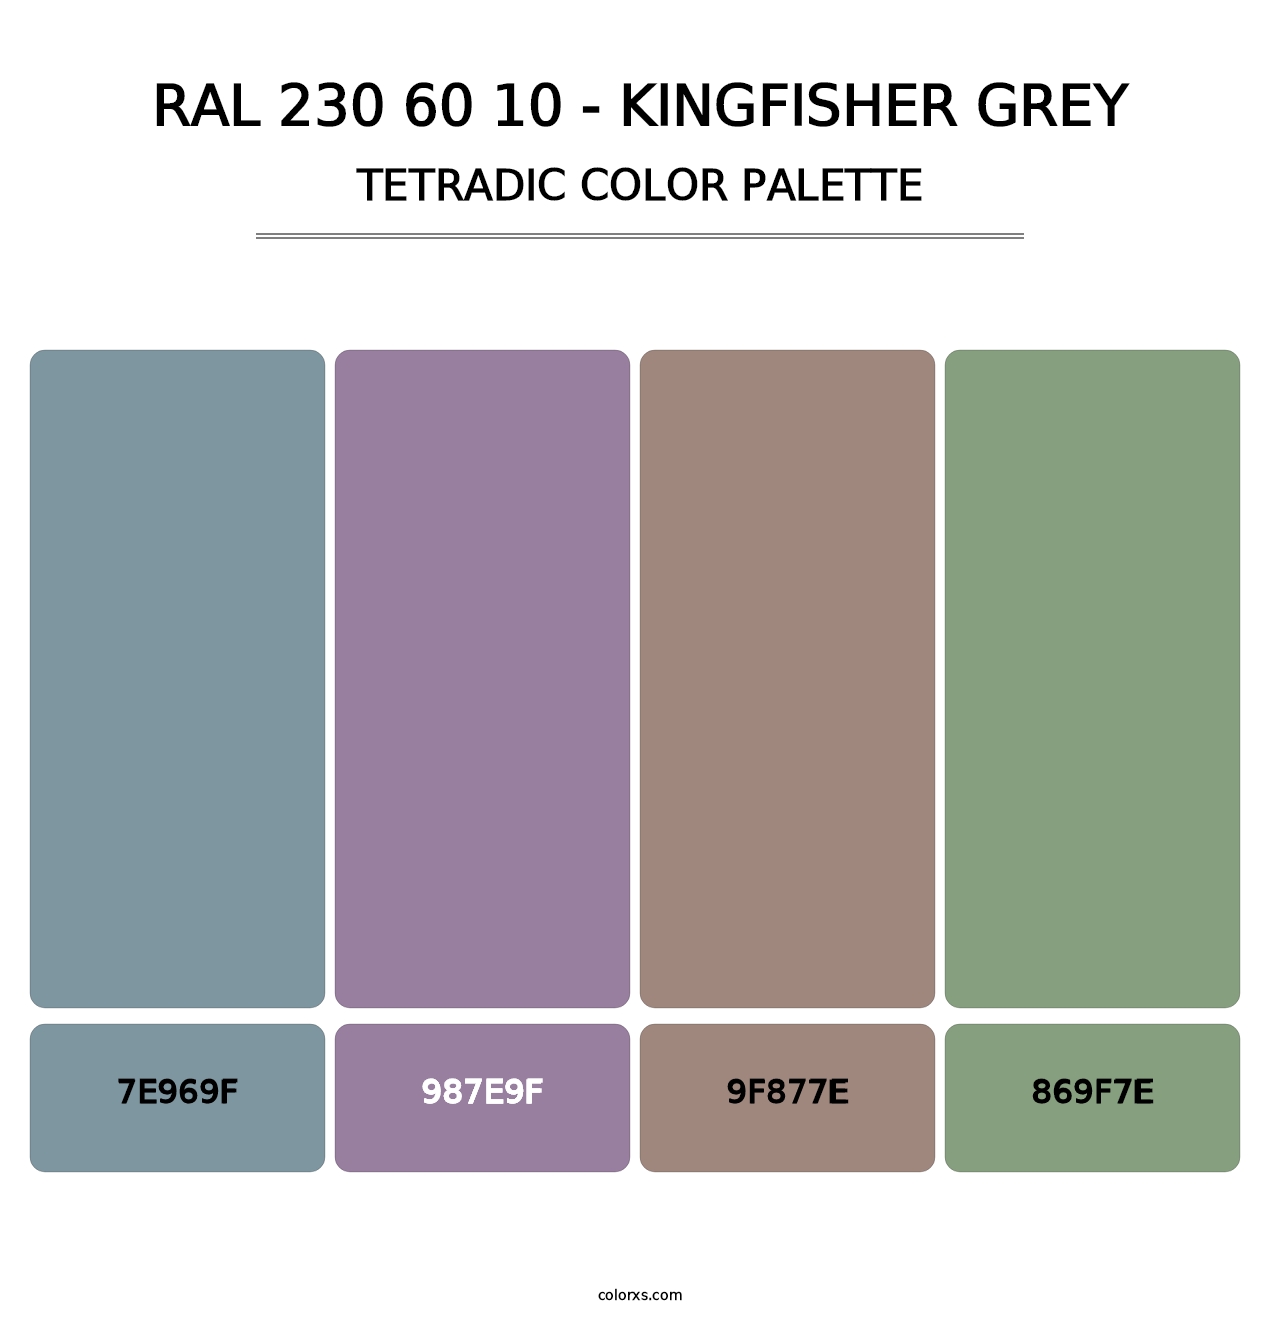 RAL 230 60 10 - Kingfisher Grey - Tetradic Color Palette